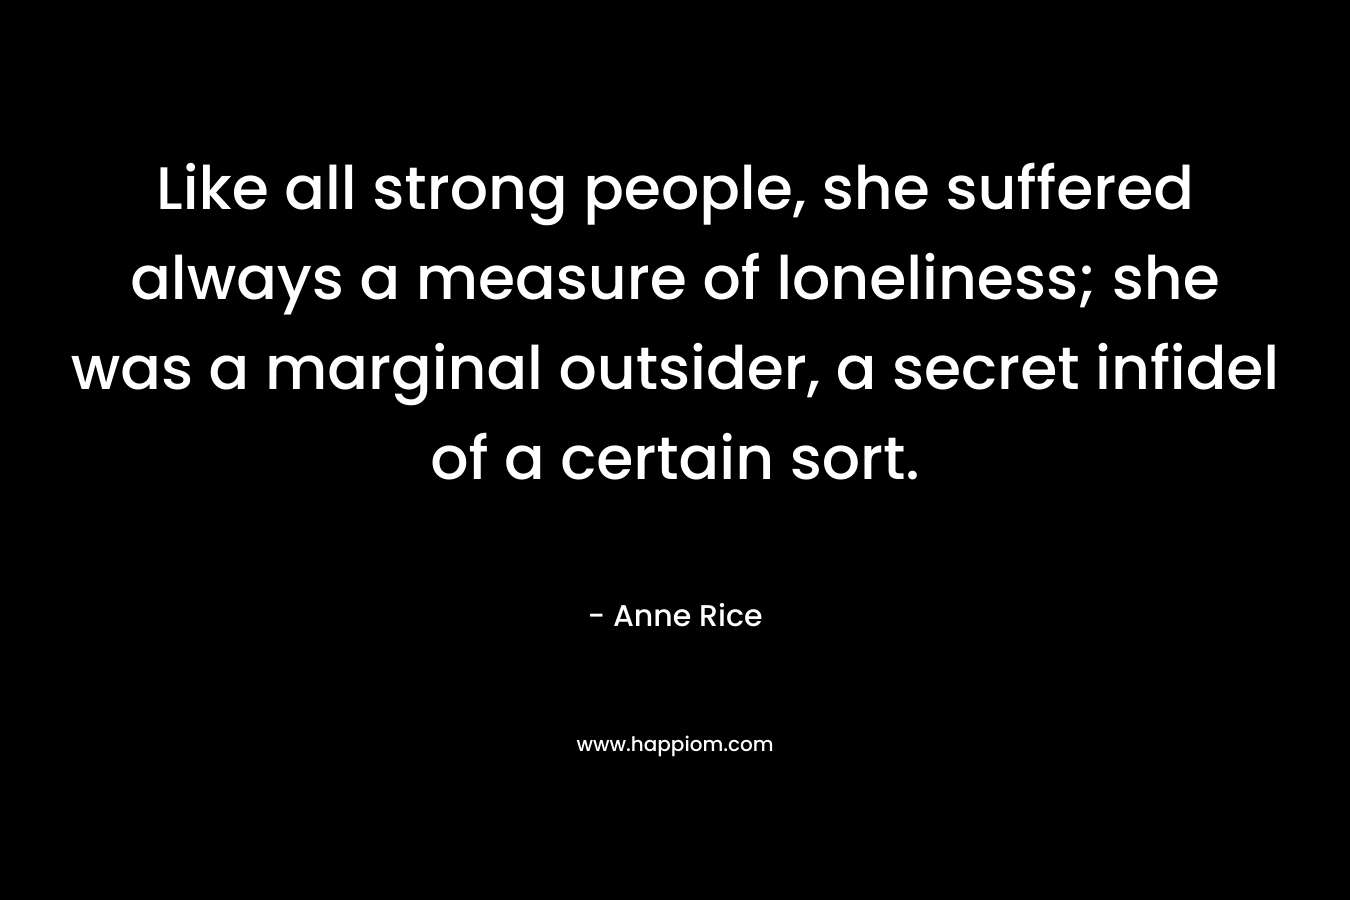 Like all strong people, she suffered always a measure of loneliness; she was a marginal outsider, a secret infidel of a certain sort. – Anne Rice